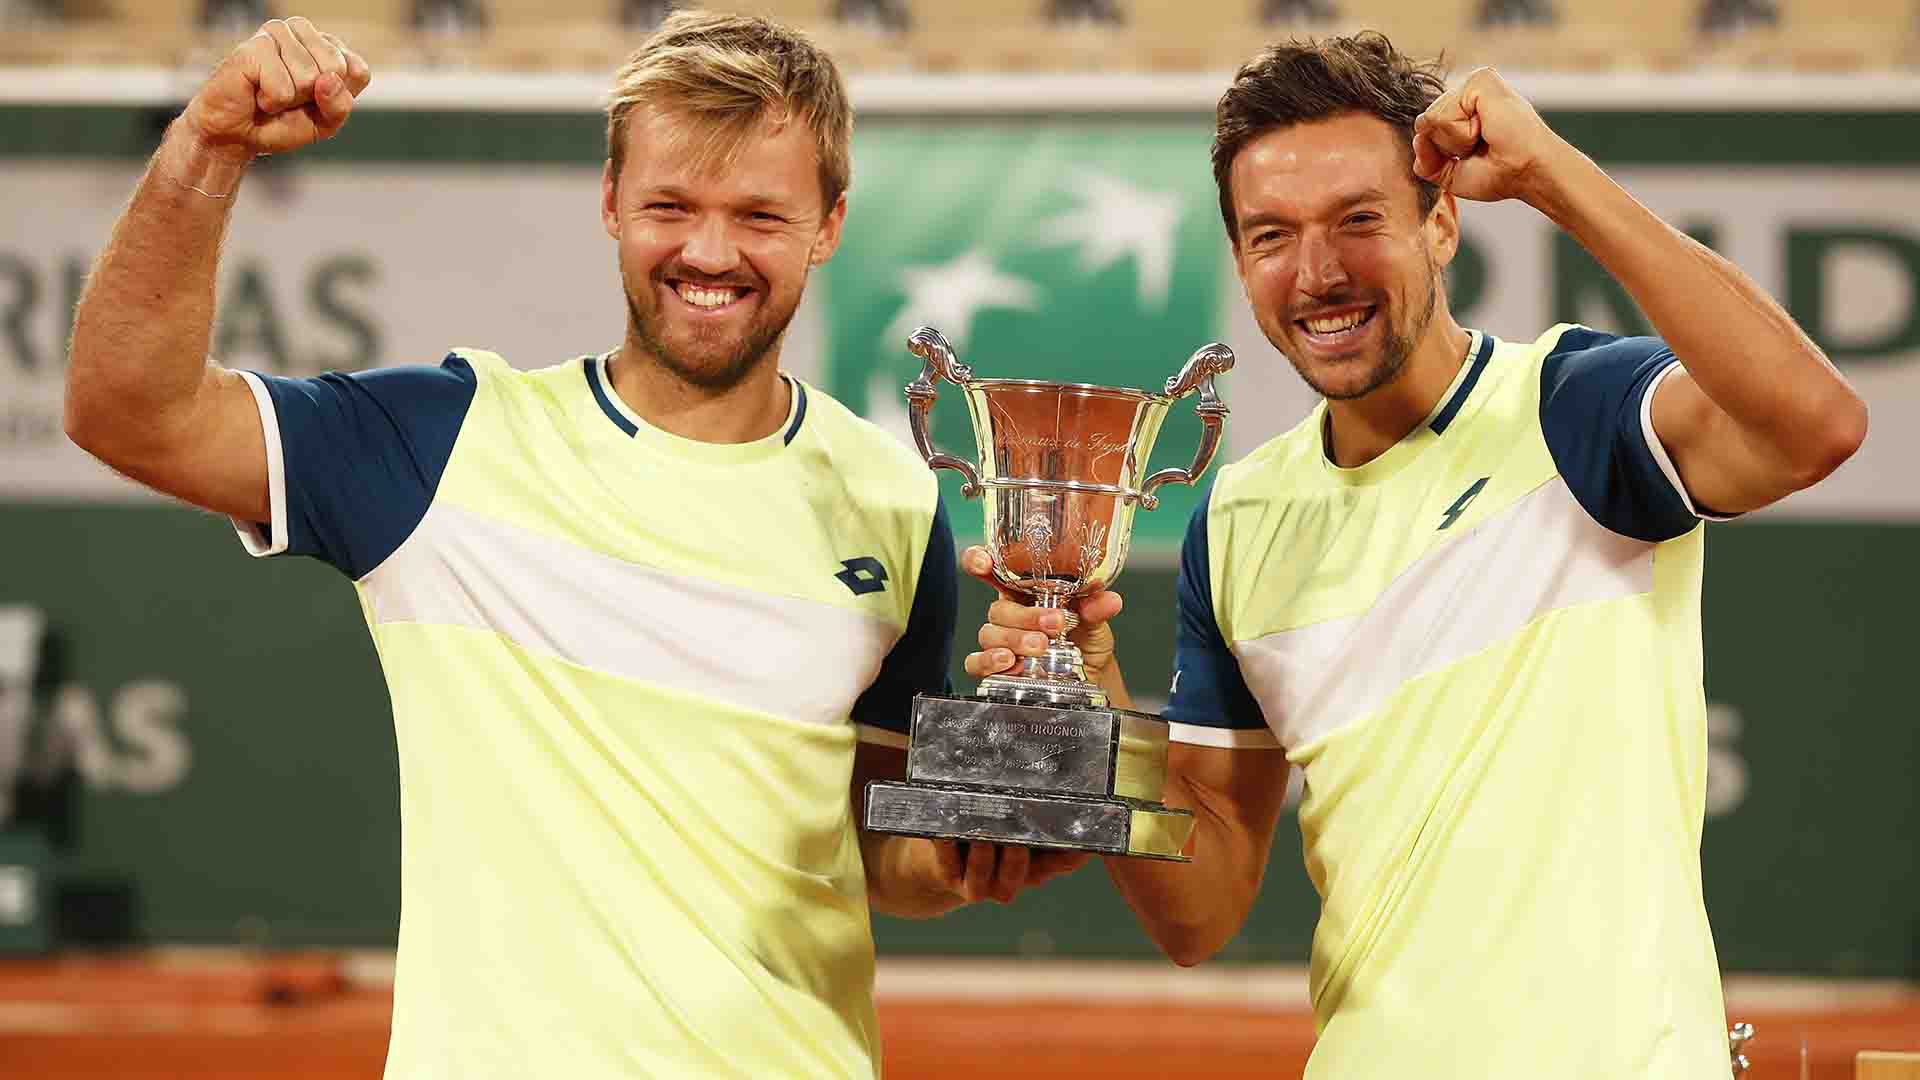 Kevin Krawietz and Andreas Mies beat three consecutive seeded teams to lift the Roland Garros trophy.